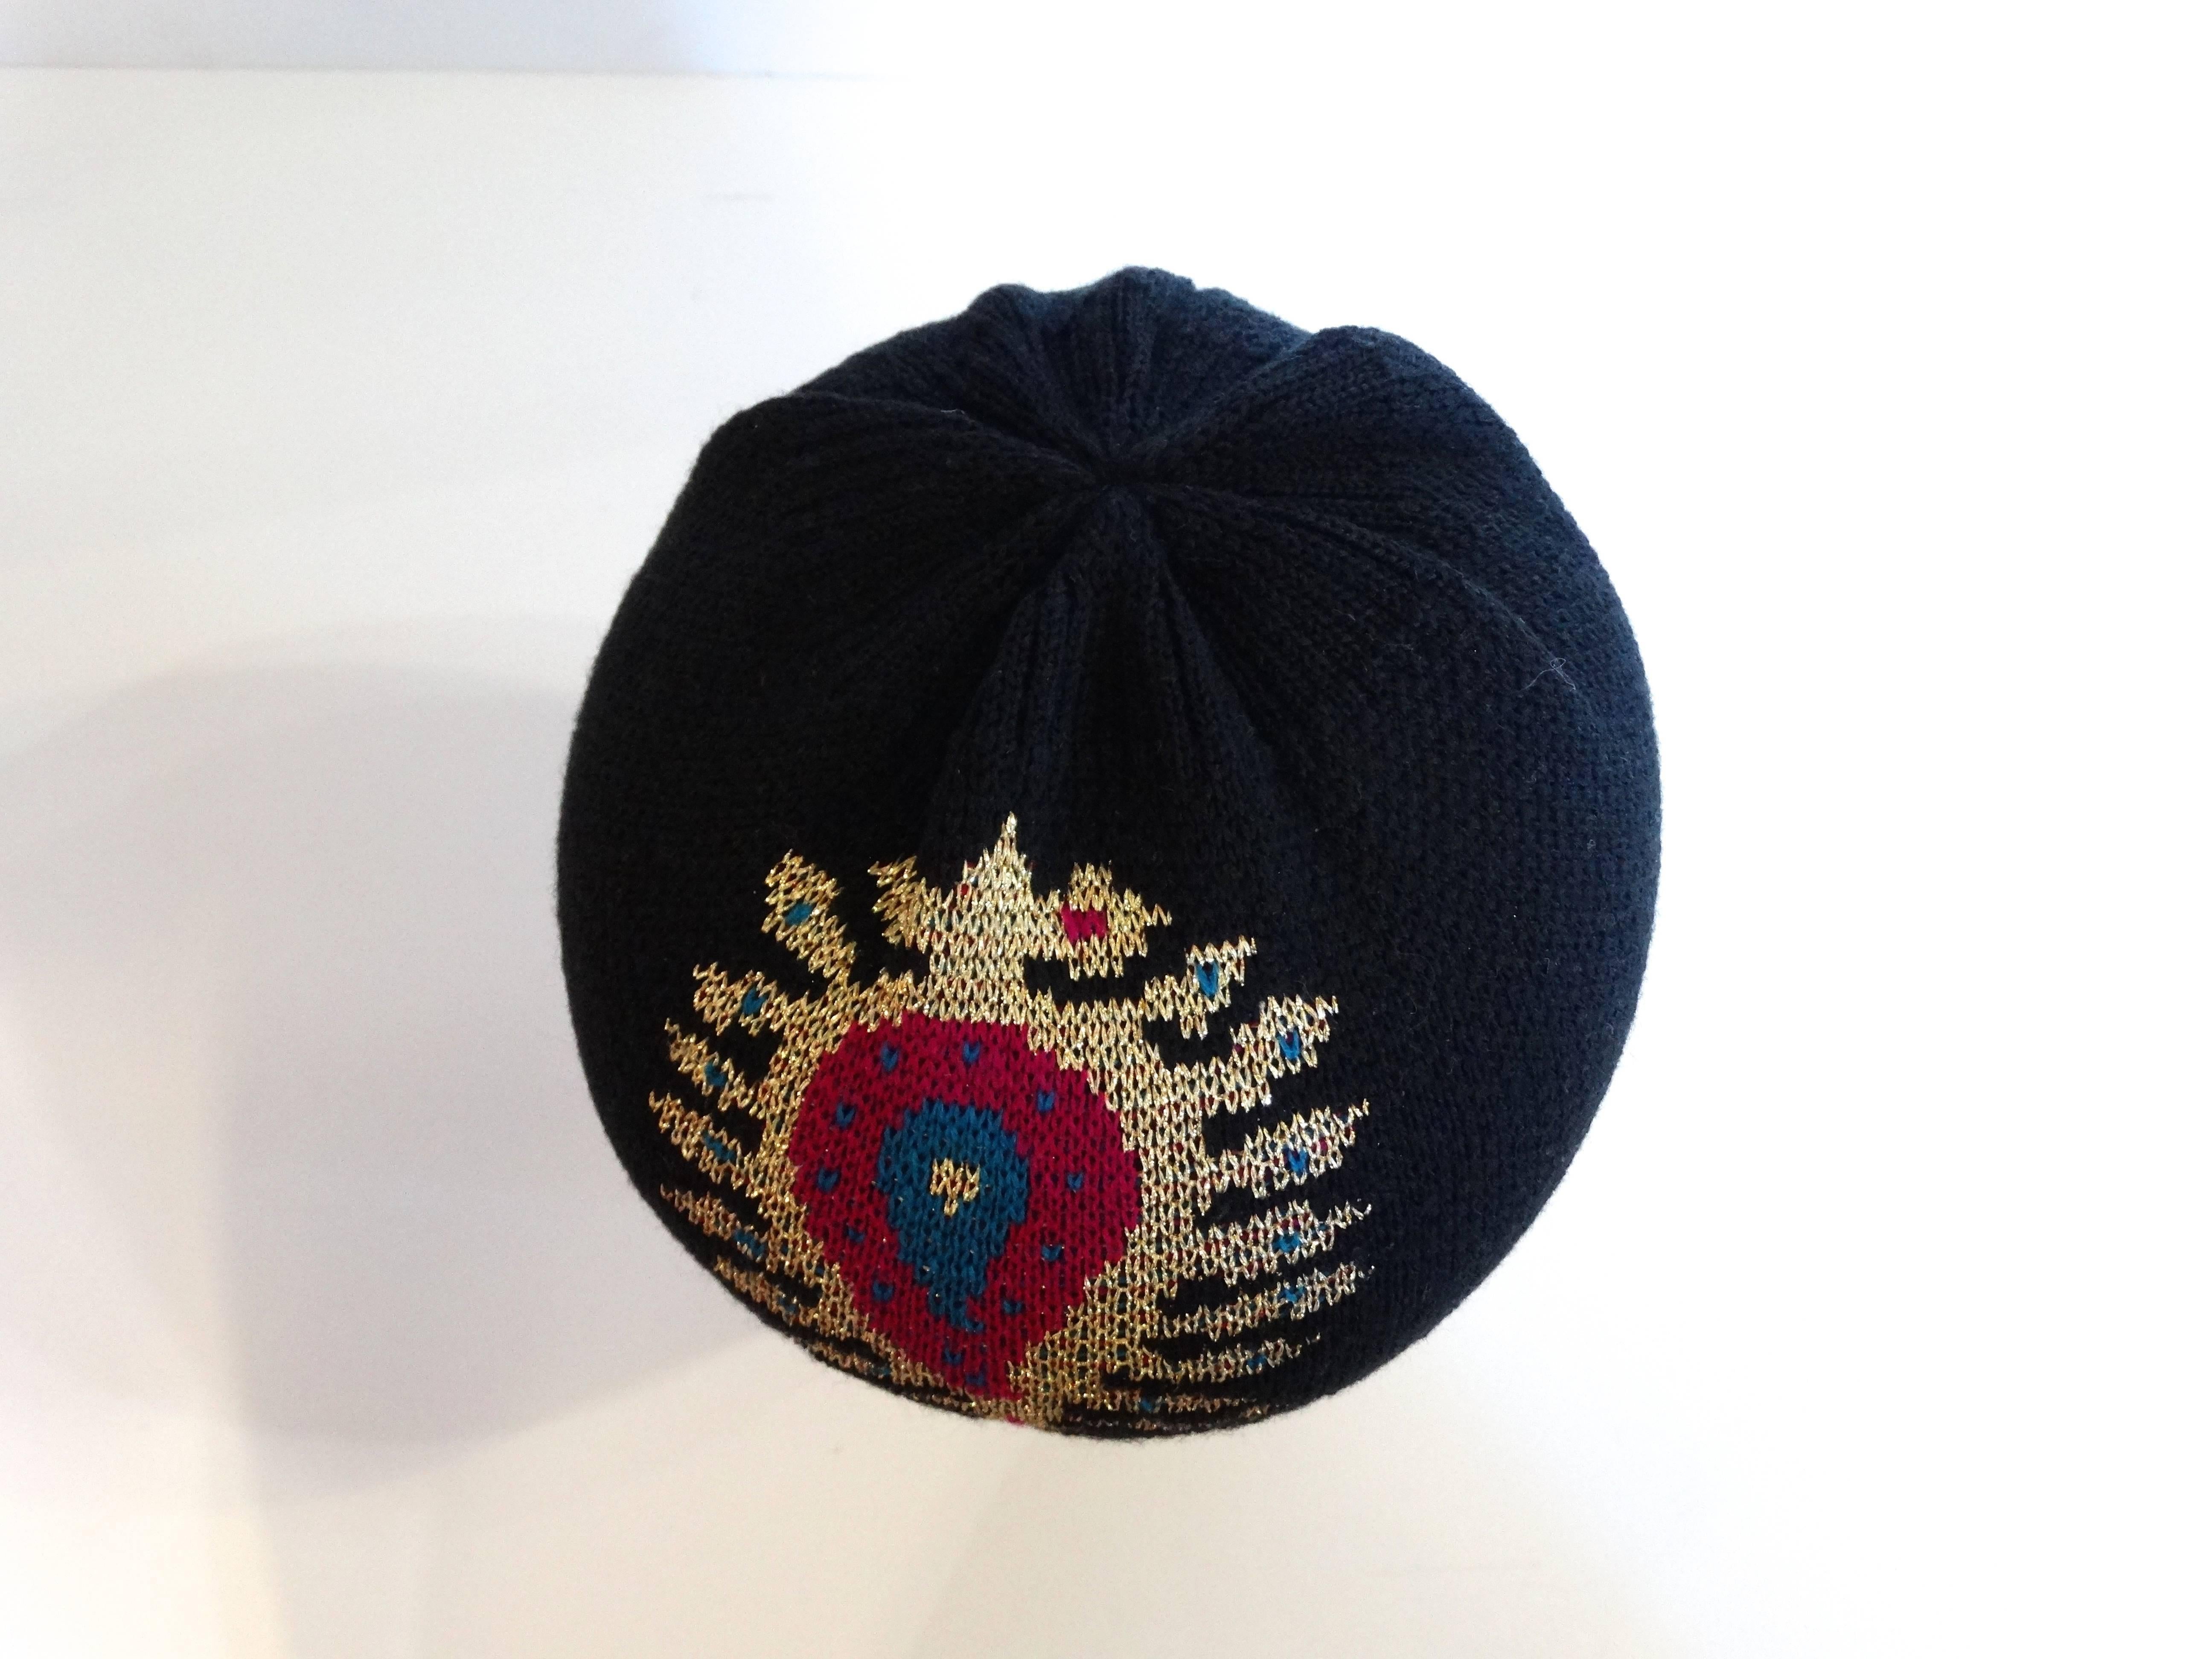 Rare 1970s Yves Saint Laurent Knitted Peacock Beanie  In Excellent Condition For Sale In Scottsdale, AZ